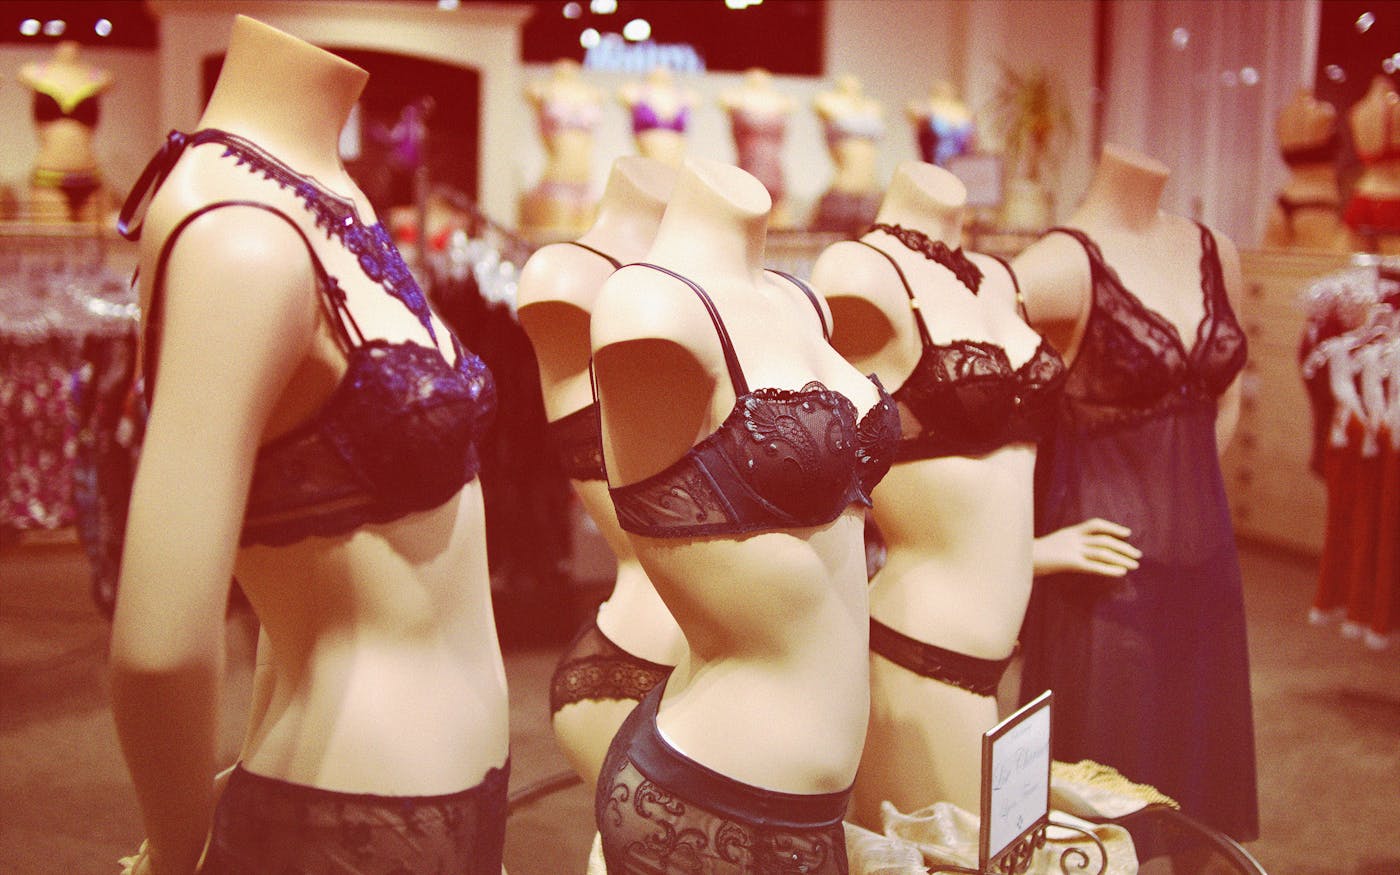 The Absolute Best 6 Places to Buy a Bra in Dallas